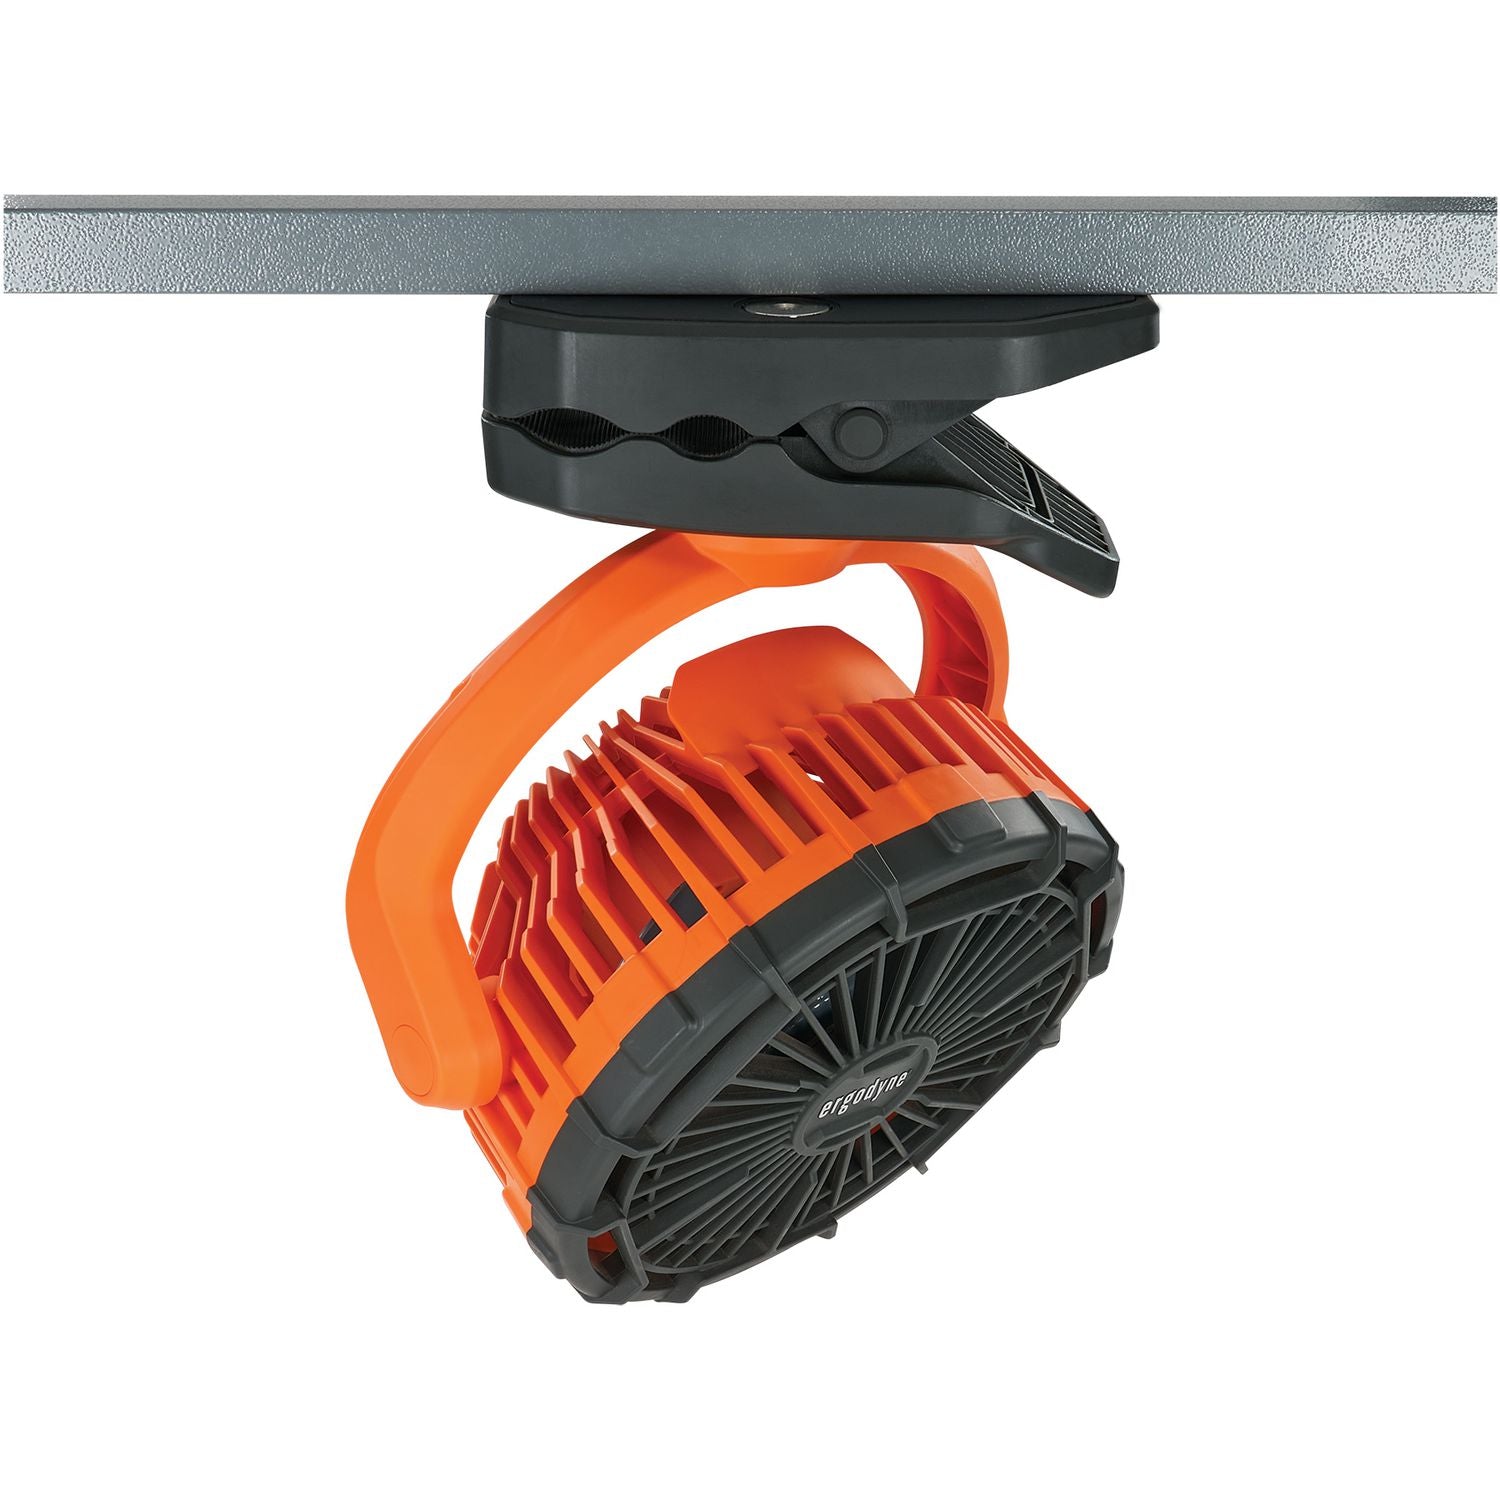 chill-its-6090-rechargeable-portable-jobsite-fan-95-orange-black-ships-in-1-3-business-days_ego12800 - 2